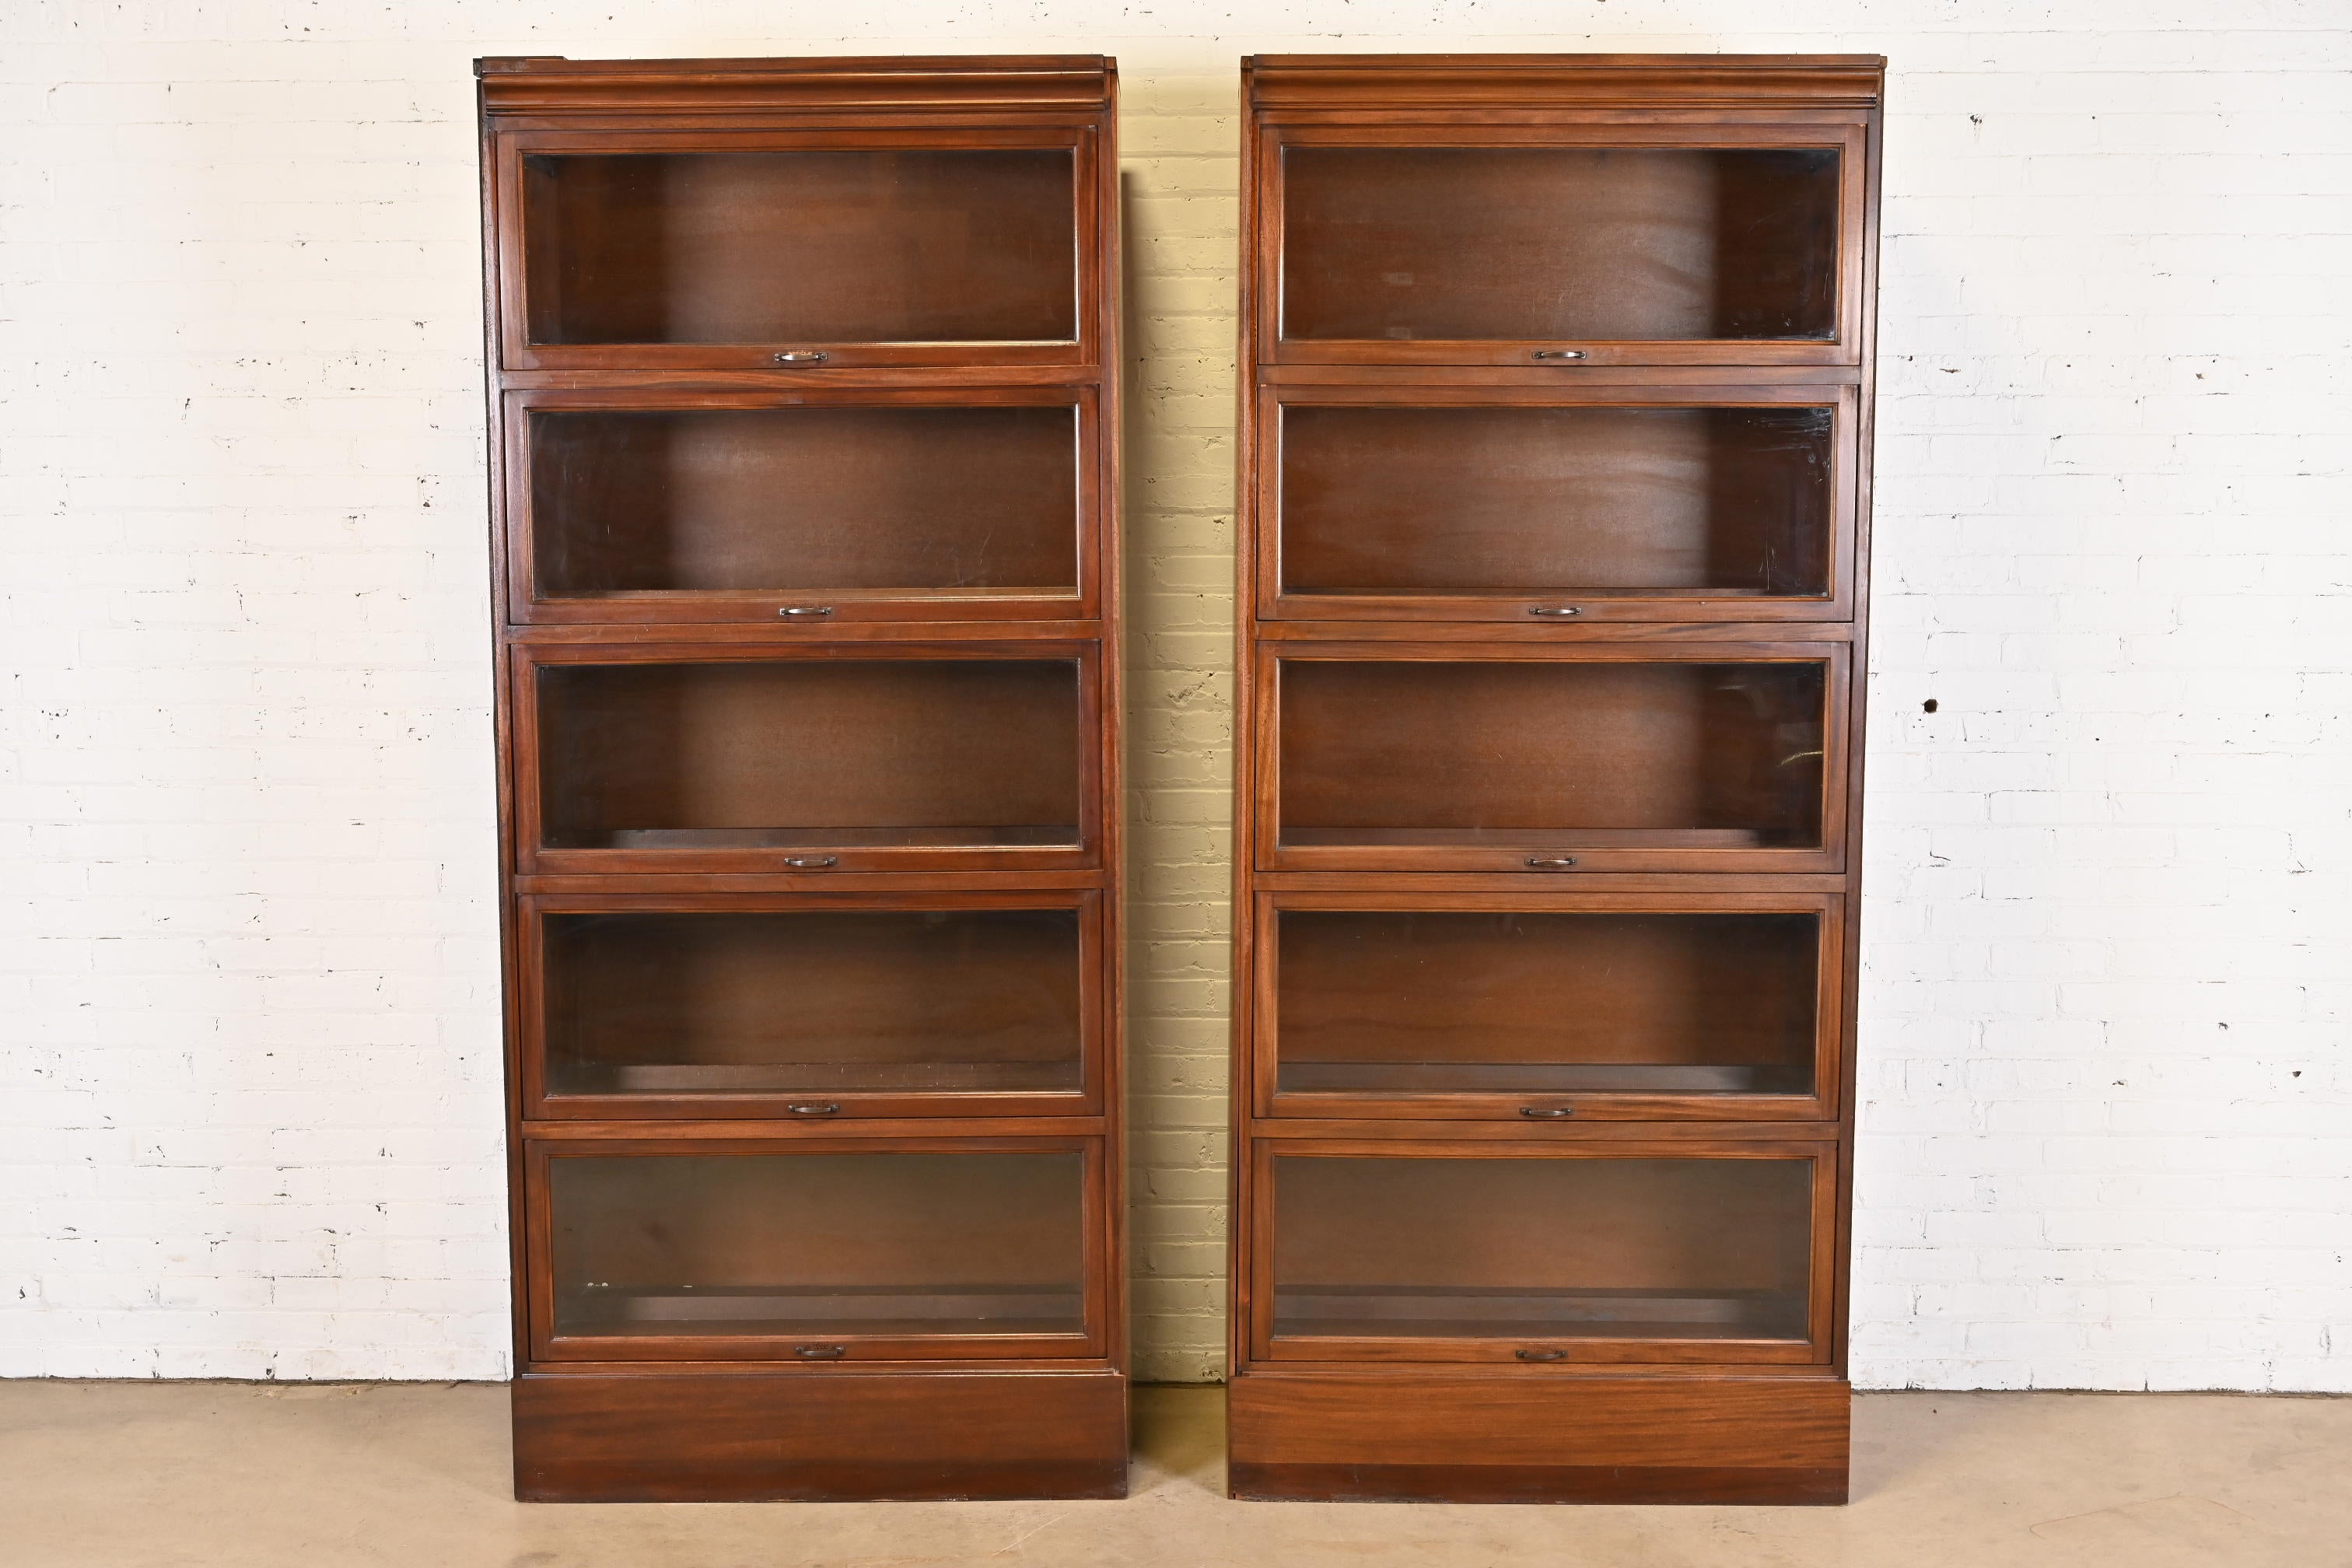 A gorgeous pair of vintage Arts & Crafts large five-stack barrister bookcases

In the manner of Globe Wernicke

USA, Mid-20th Century

Mahogany, with glass front doors and brass hardware.

Measures: 38.88